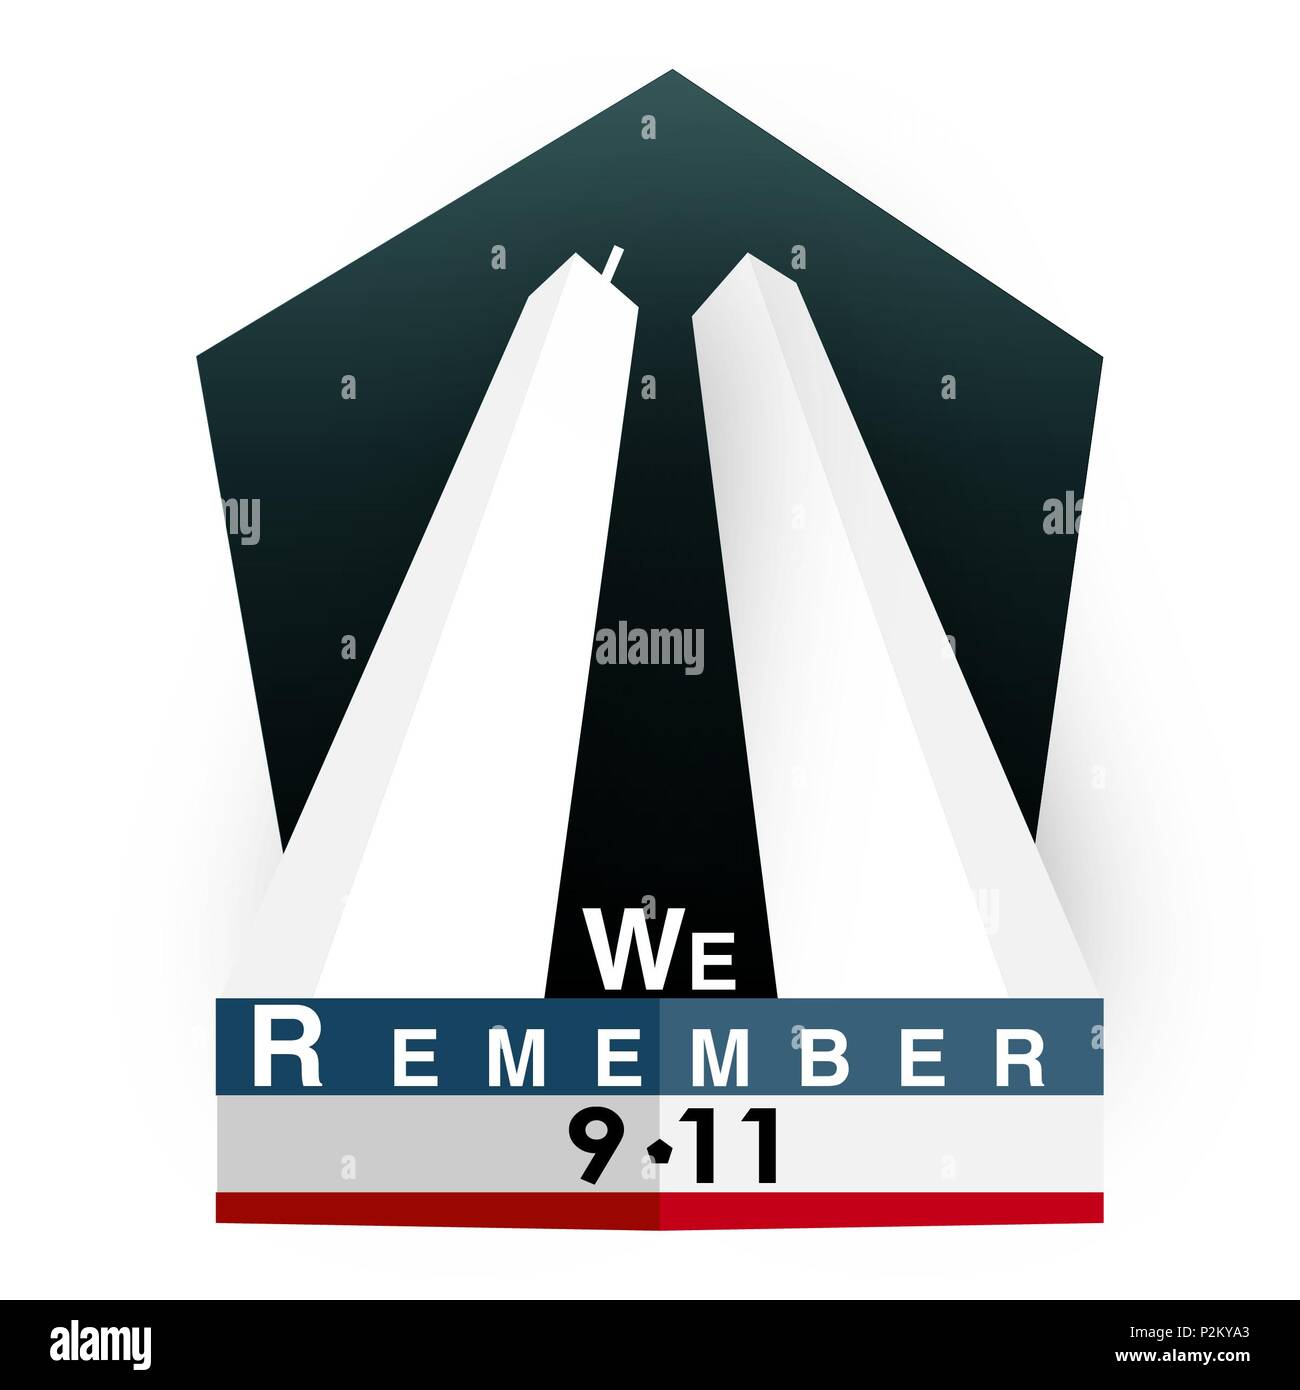 Vector based graphic design created Sep. 06, 2016 in the Regional Media Center (RMC) at the Armed Forces Network Europe on Sembach Kaserne, Germany, in remembrance of 9/11/01. RMC provides news and entertainment coverage across Europe. (U.S.Army Vector Illustration by Staff Sgt. Miguel Resendiz/Released)(Compound Path,Gradients,Mask were used.) Stock Photo